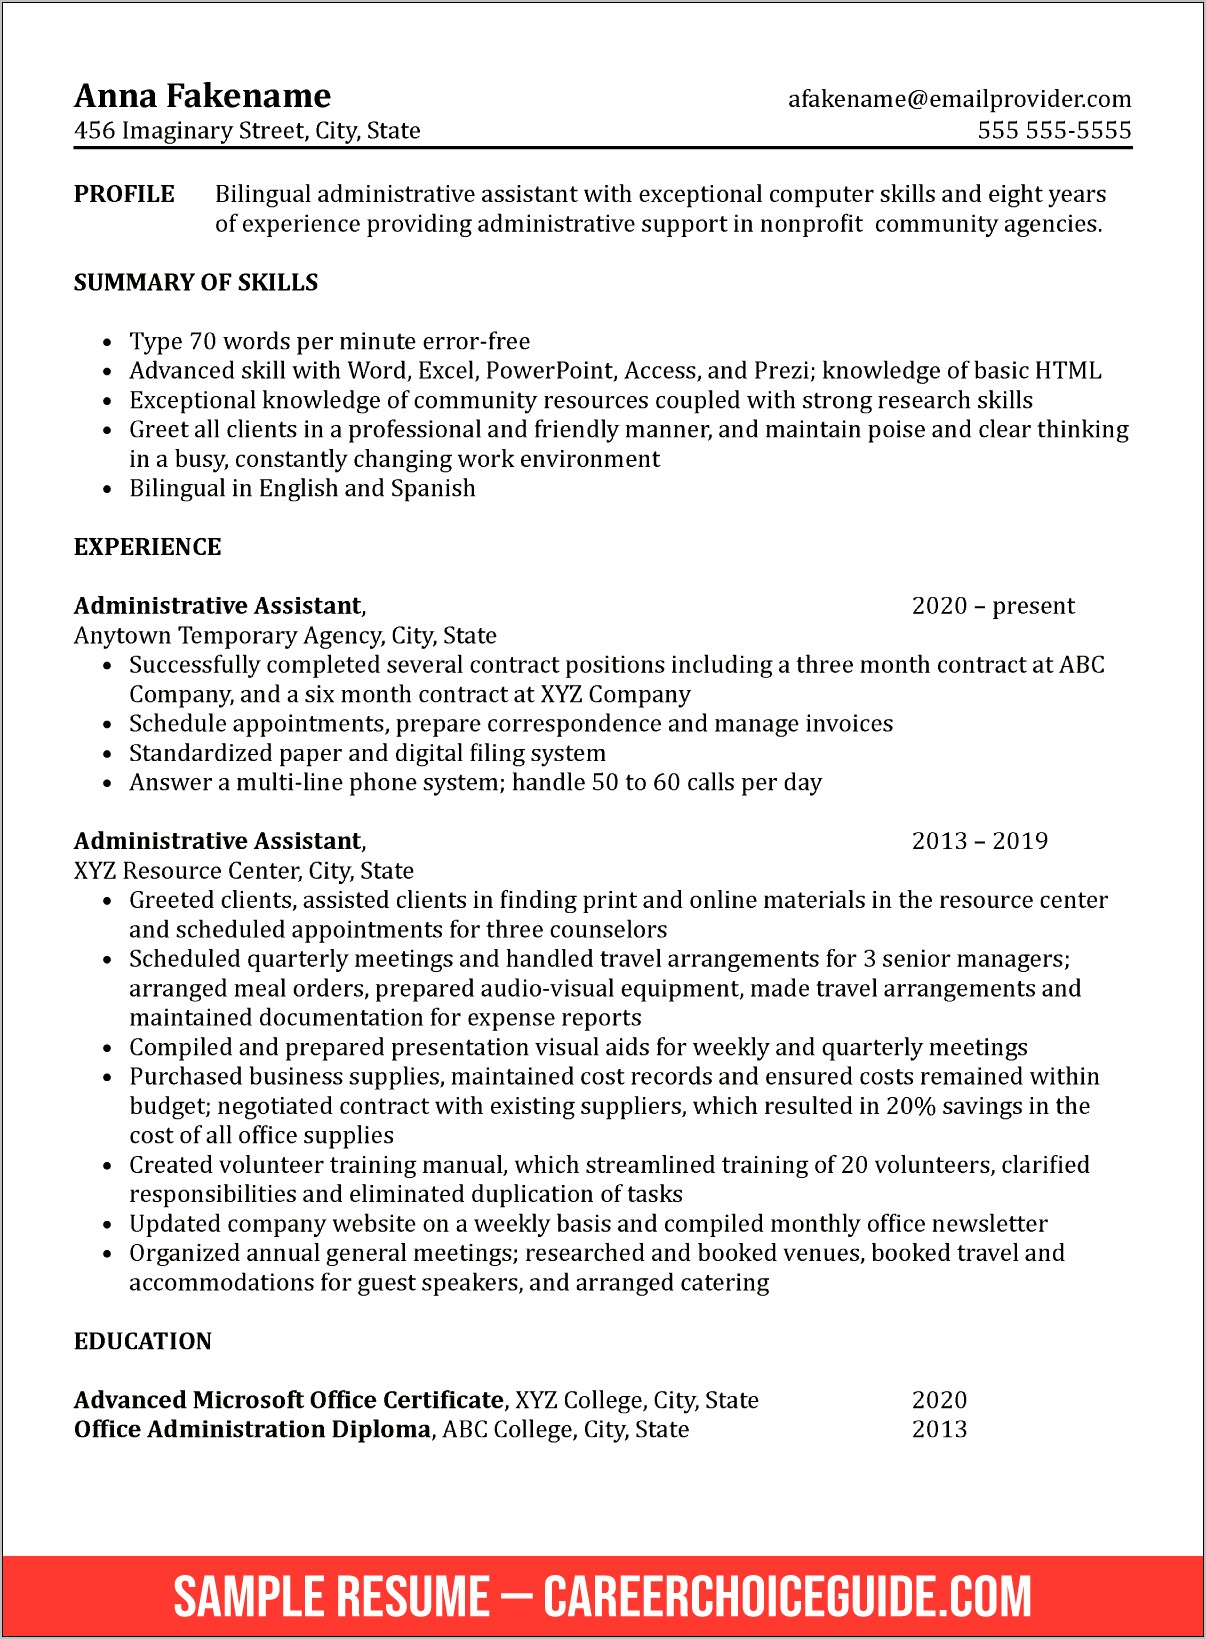 Skills And Abilities For Administrative Resume